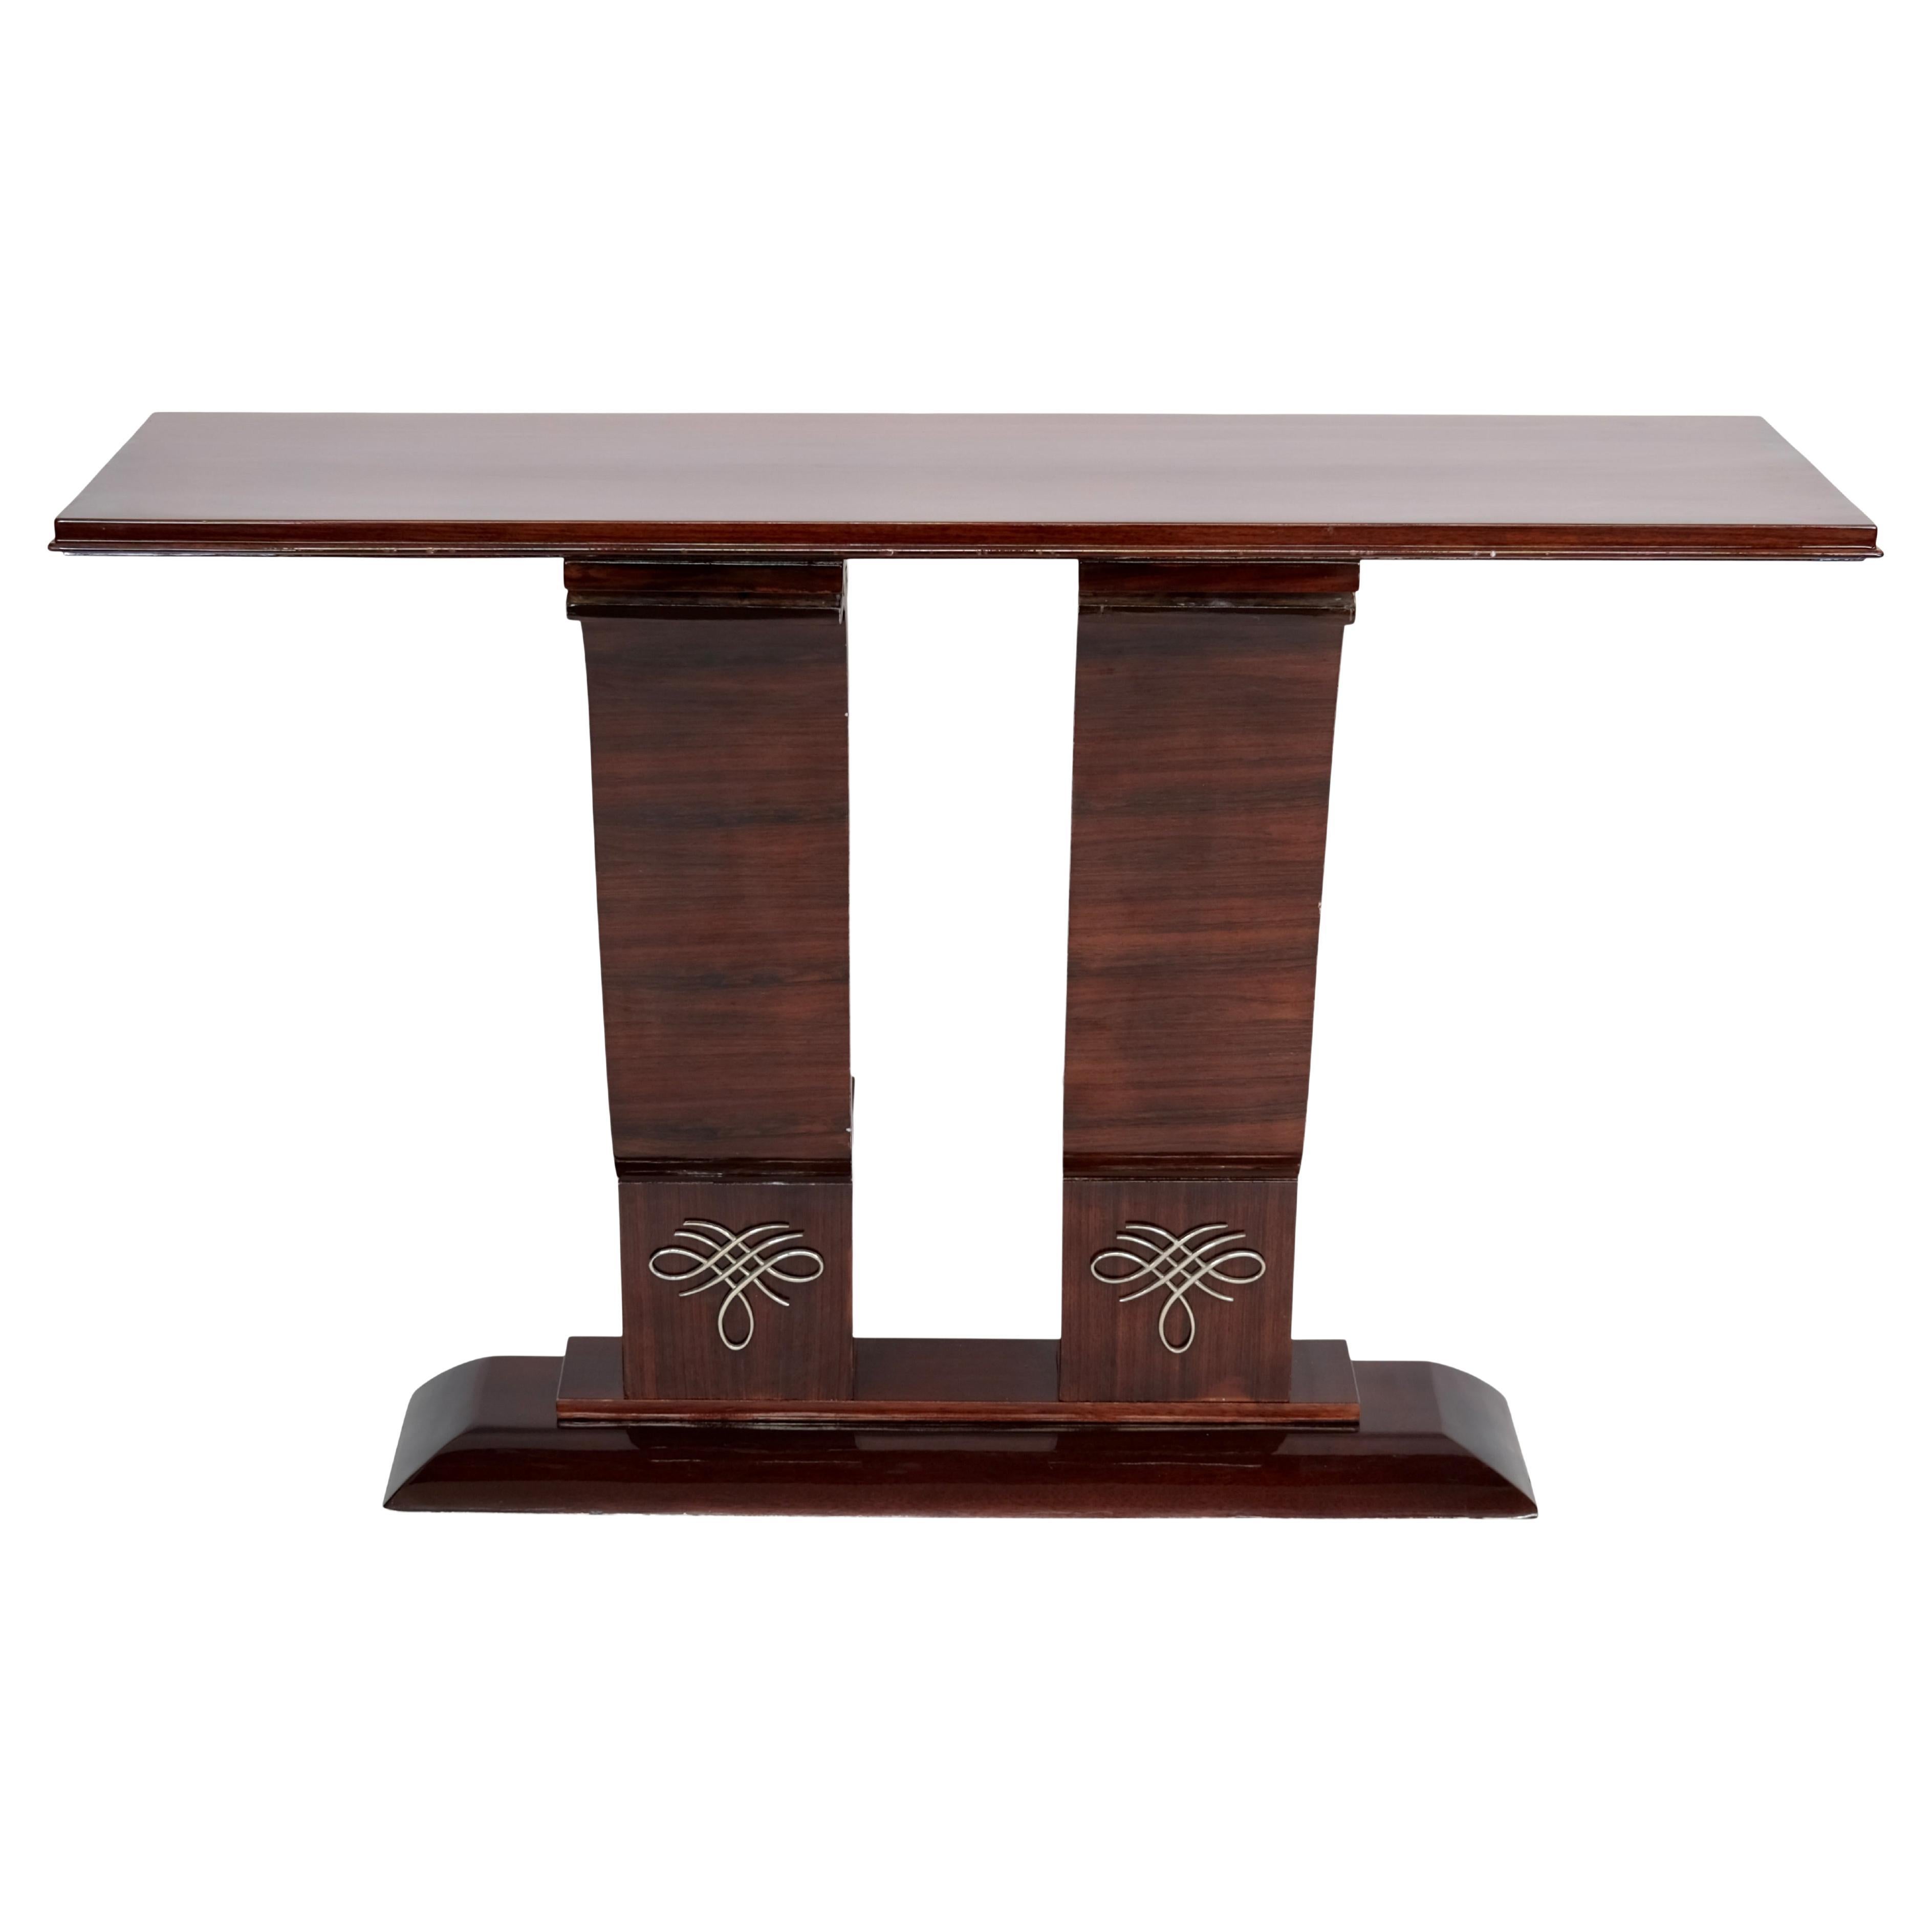 1930s French Art Deco Console Table in Mahogany